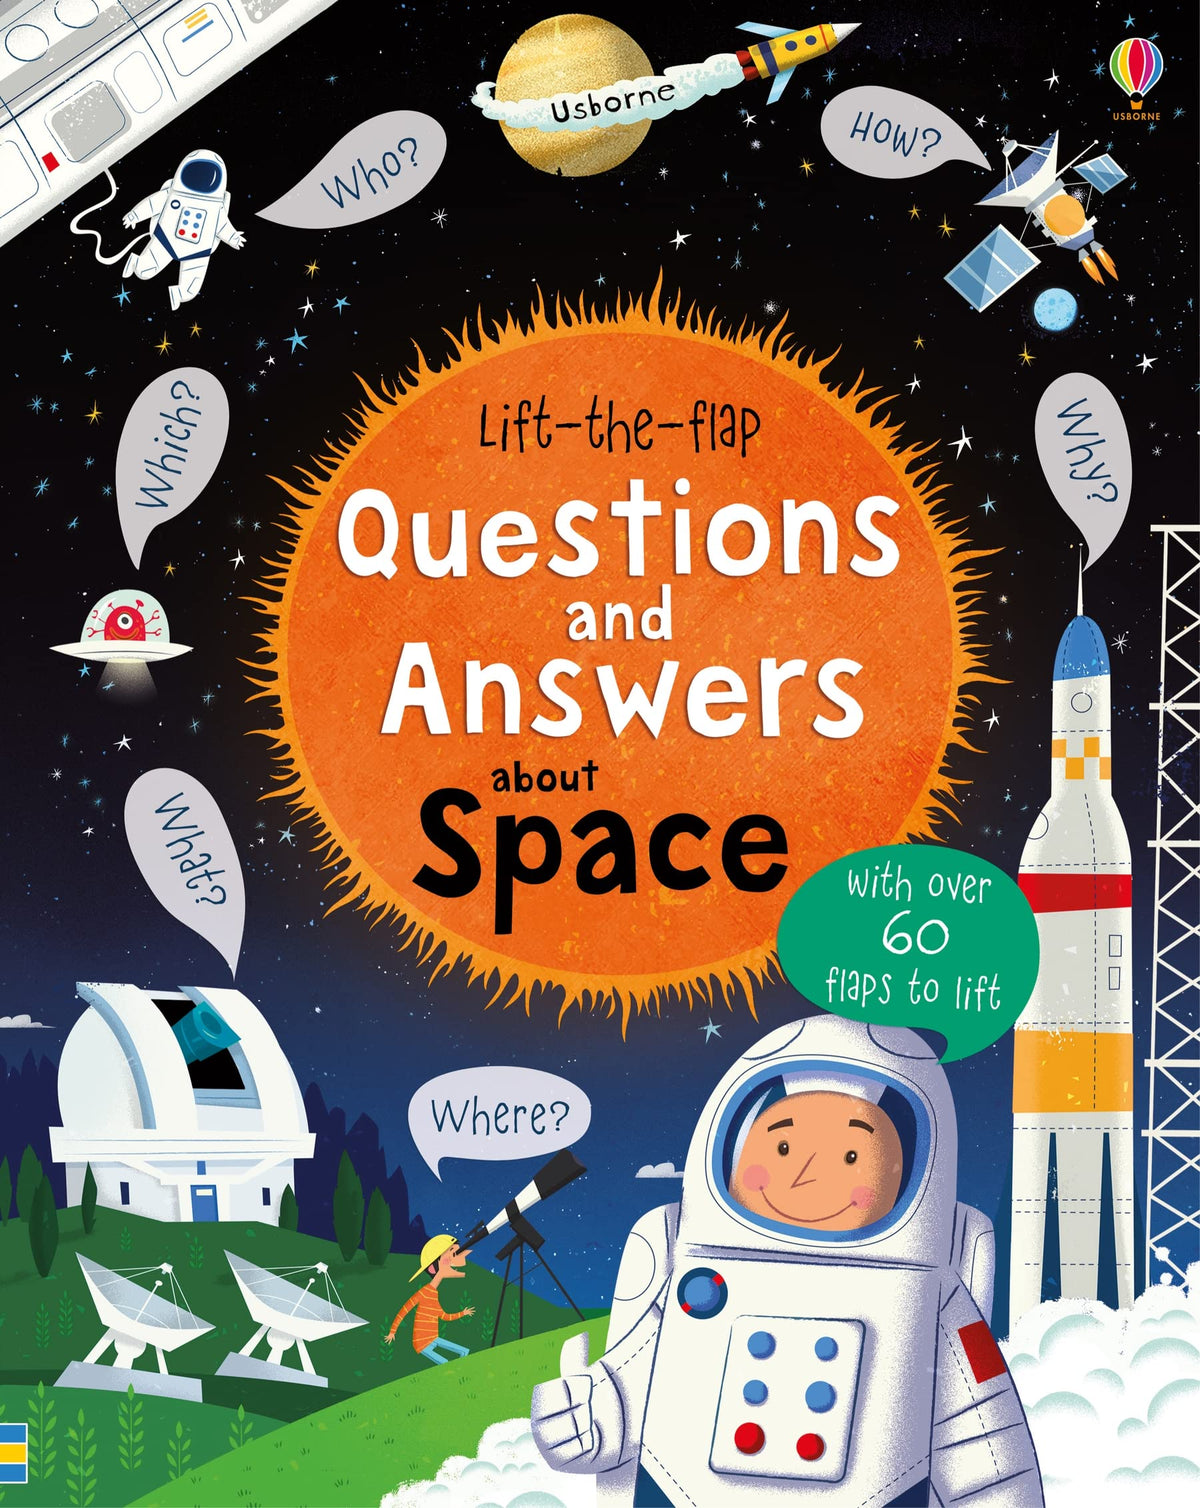 Lift-the-flap Questions and Answers about Space (Questions & Answers)